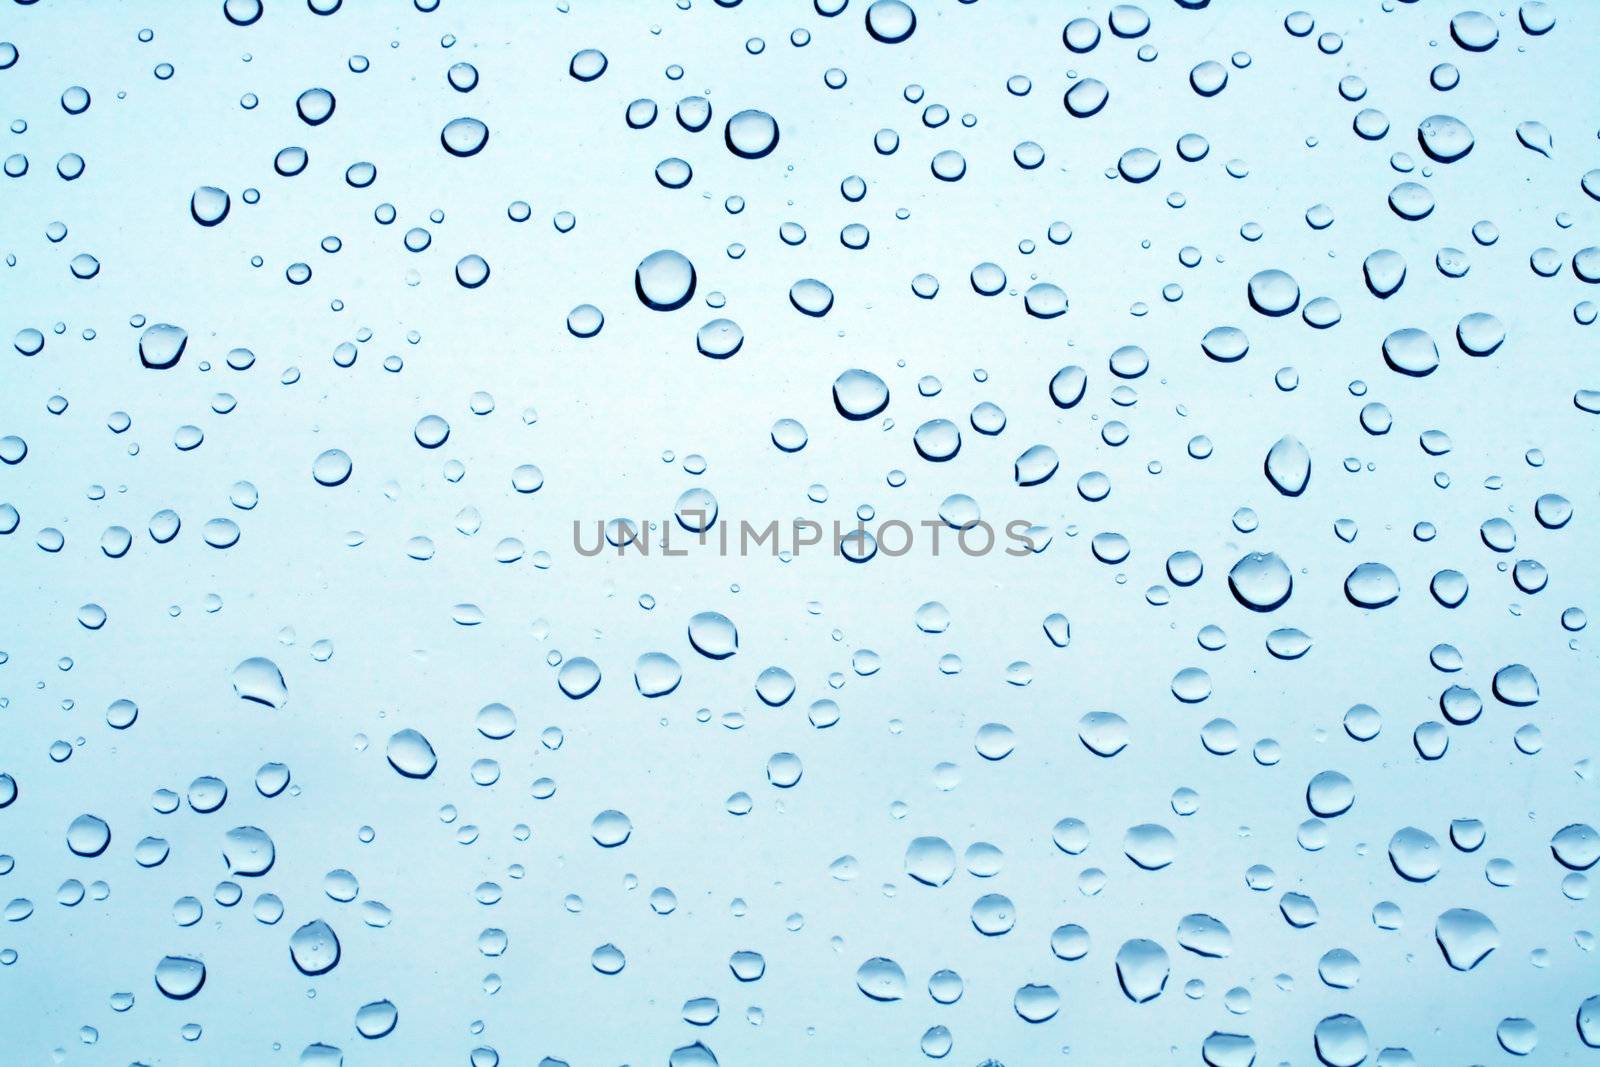 rain drops on glass textured background